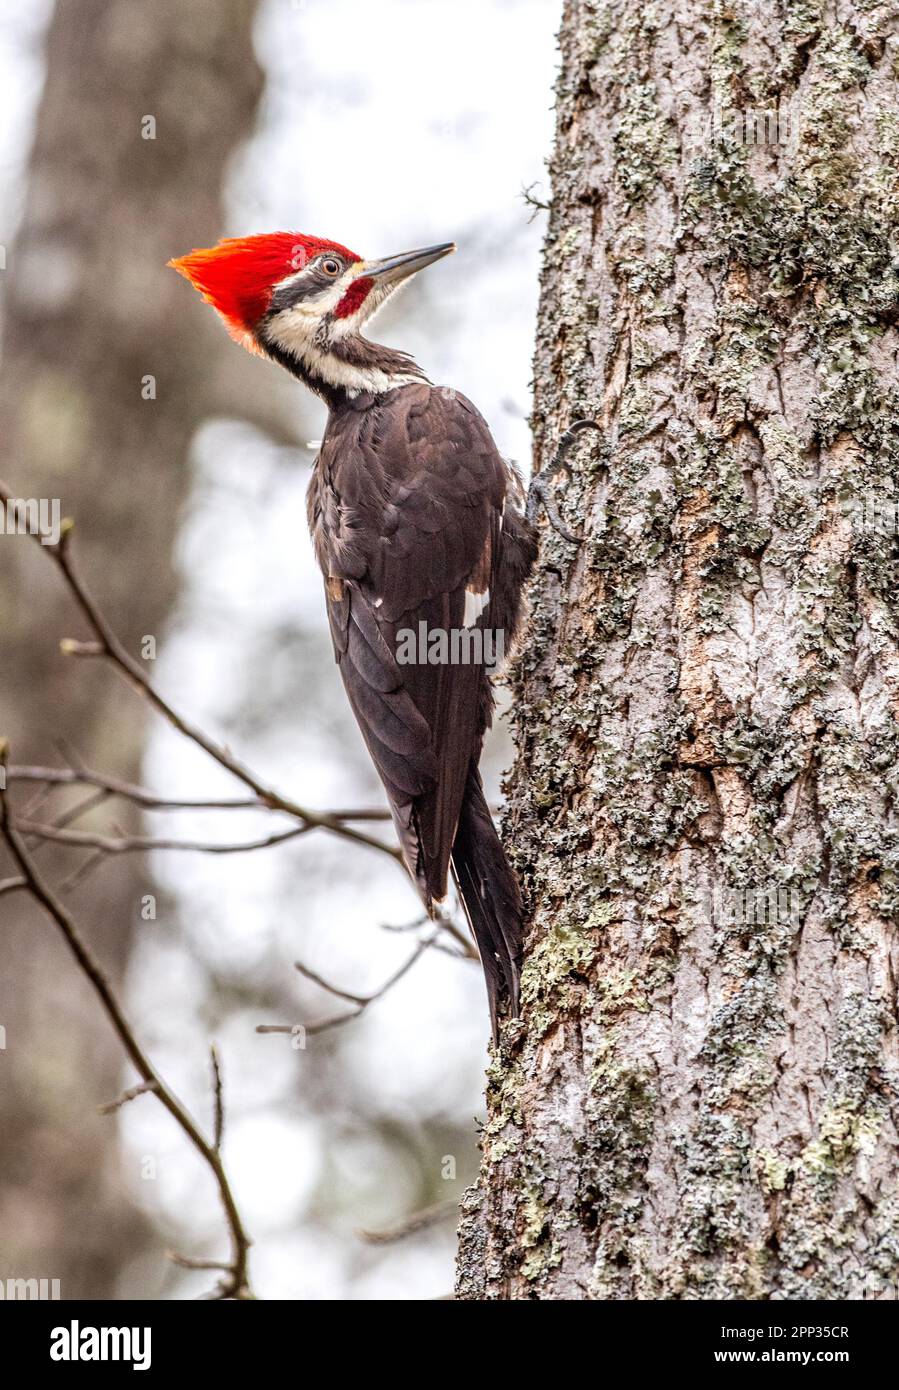 A Pileated woodpecker rests on a tree trunk getting ready to peck away on the bark. Stock Photo